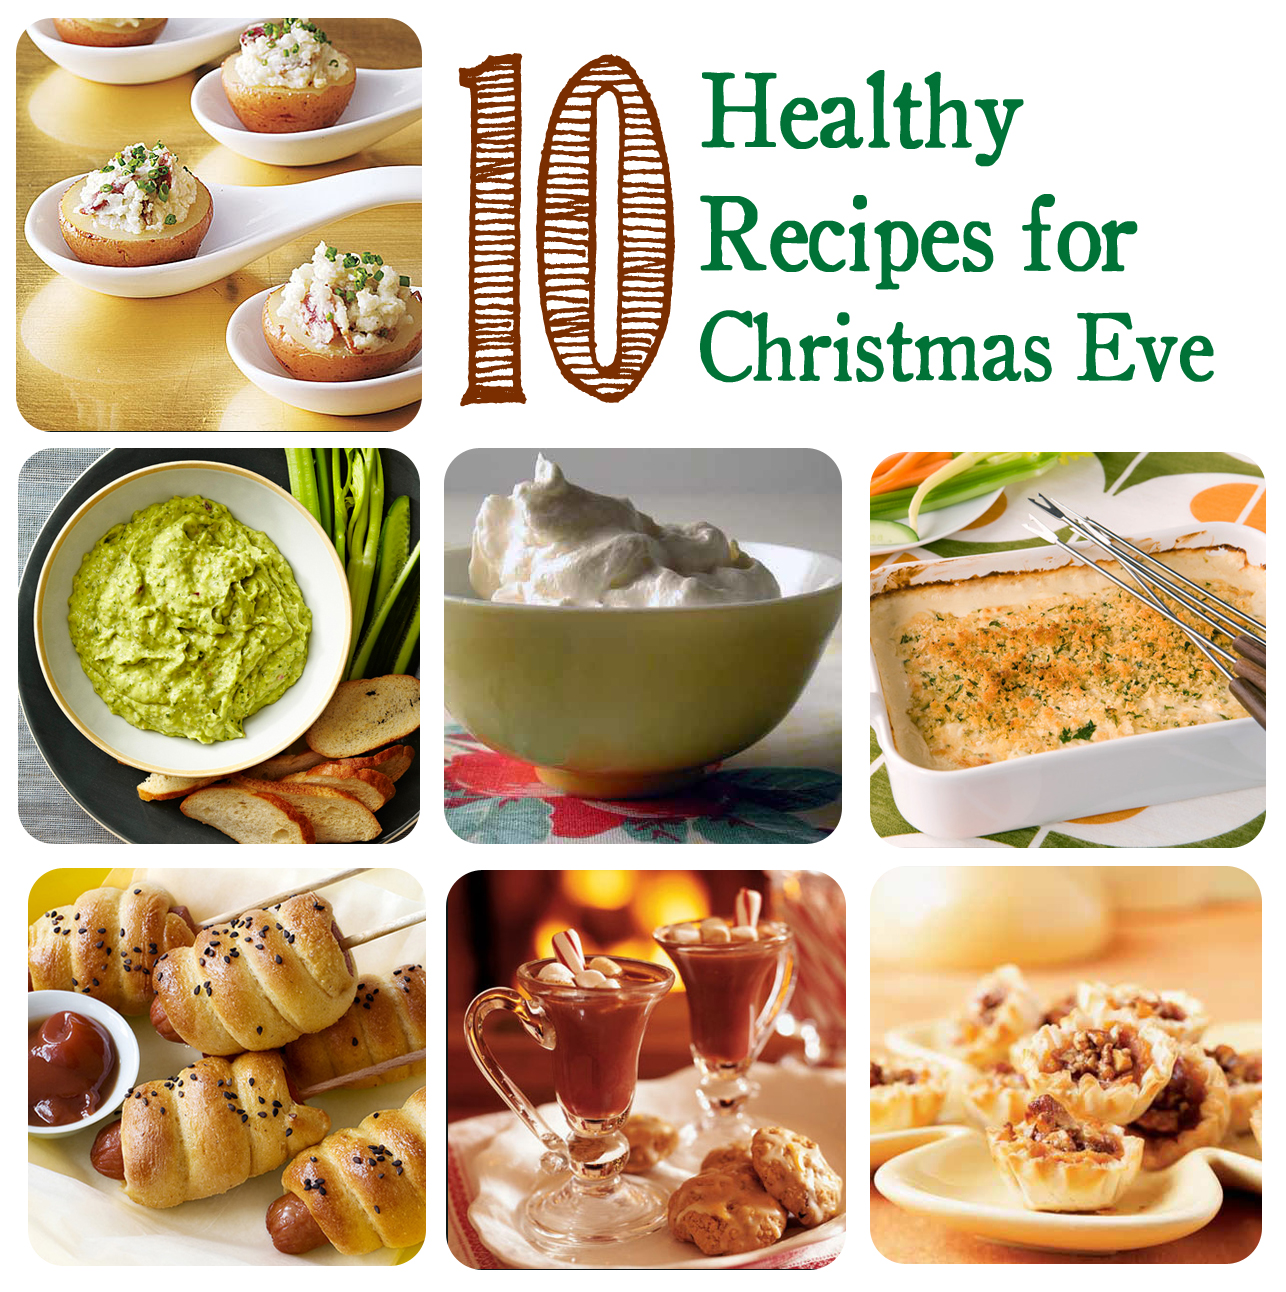 My Inspired Home: Christmas Eve: Healthy Appetizers